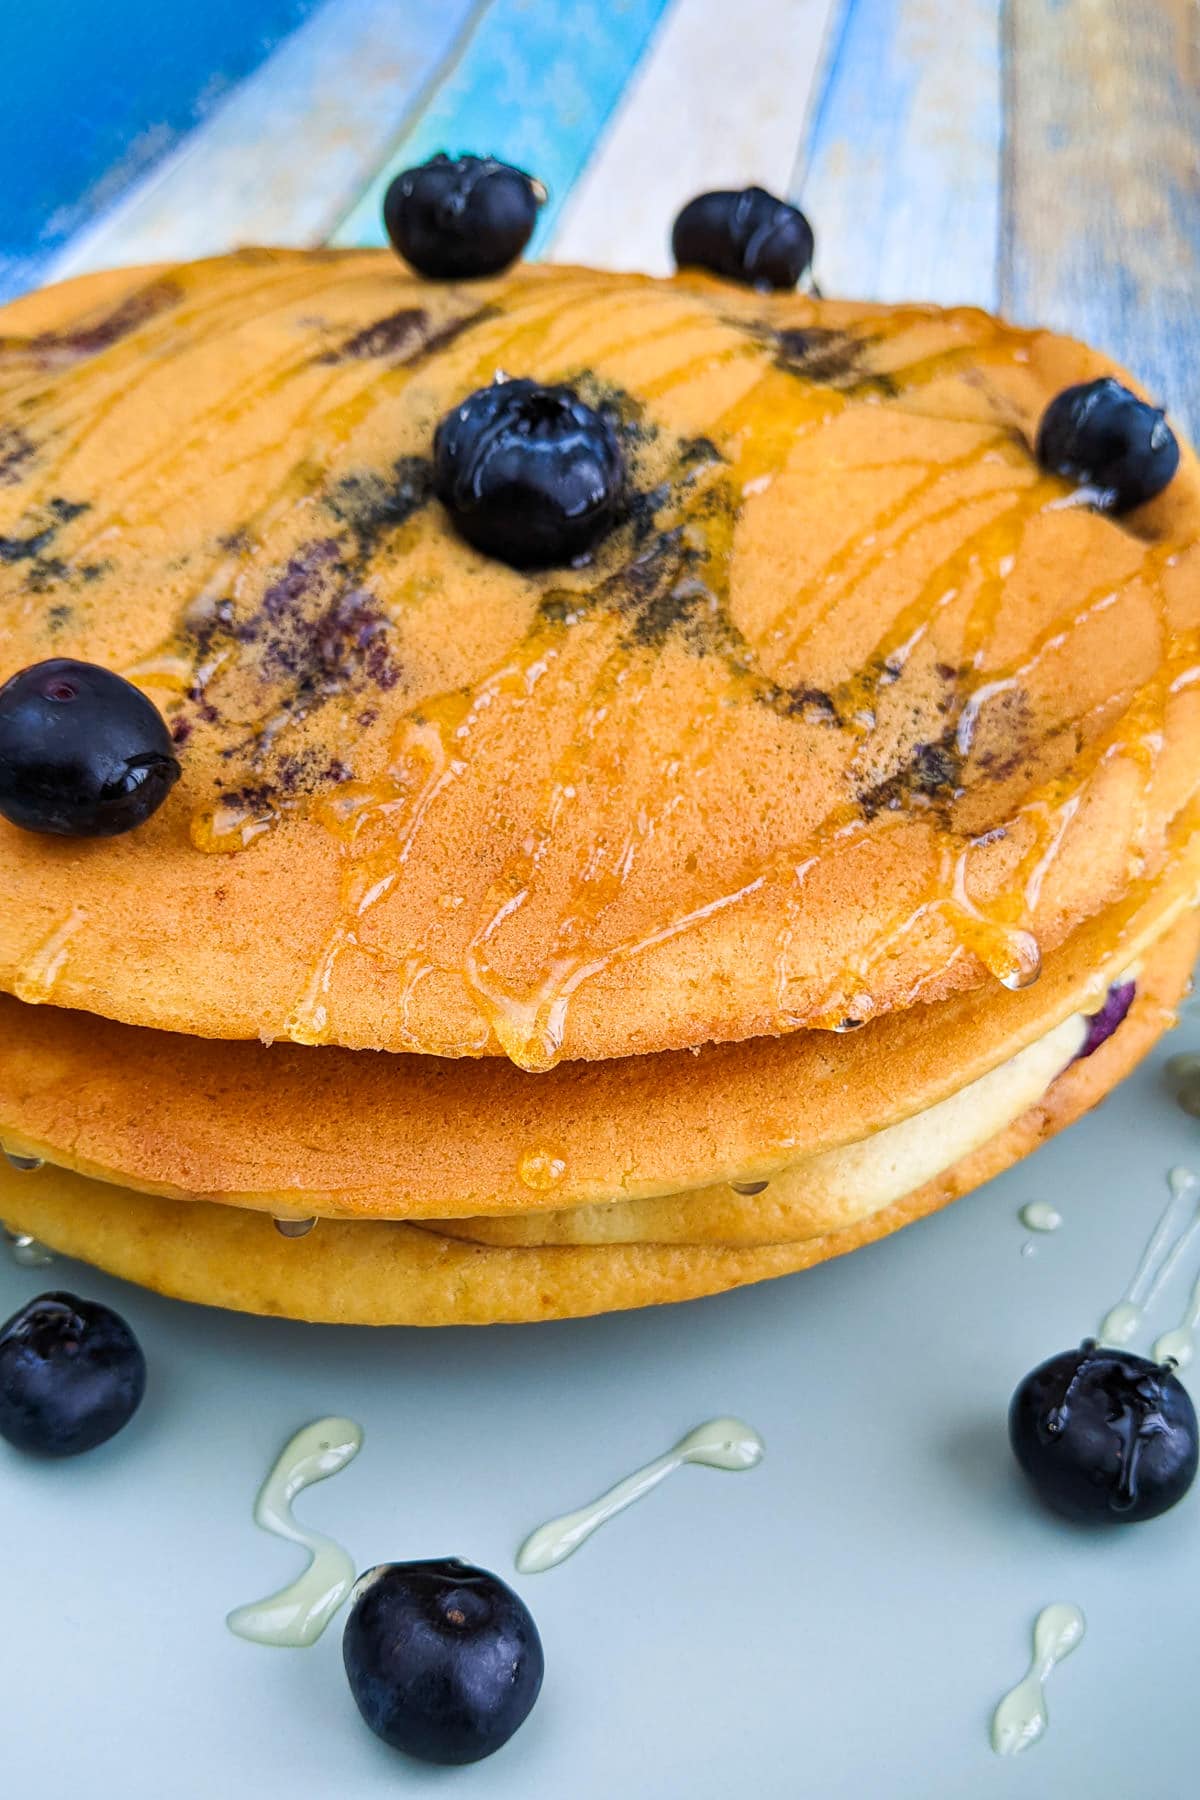 Homemade pancakes with honey and blueberries.